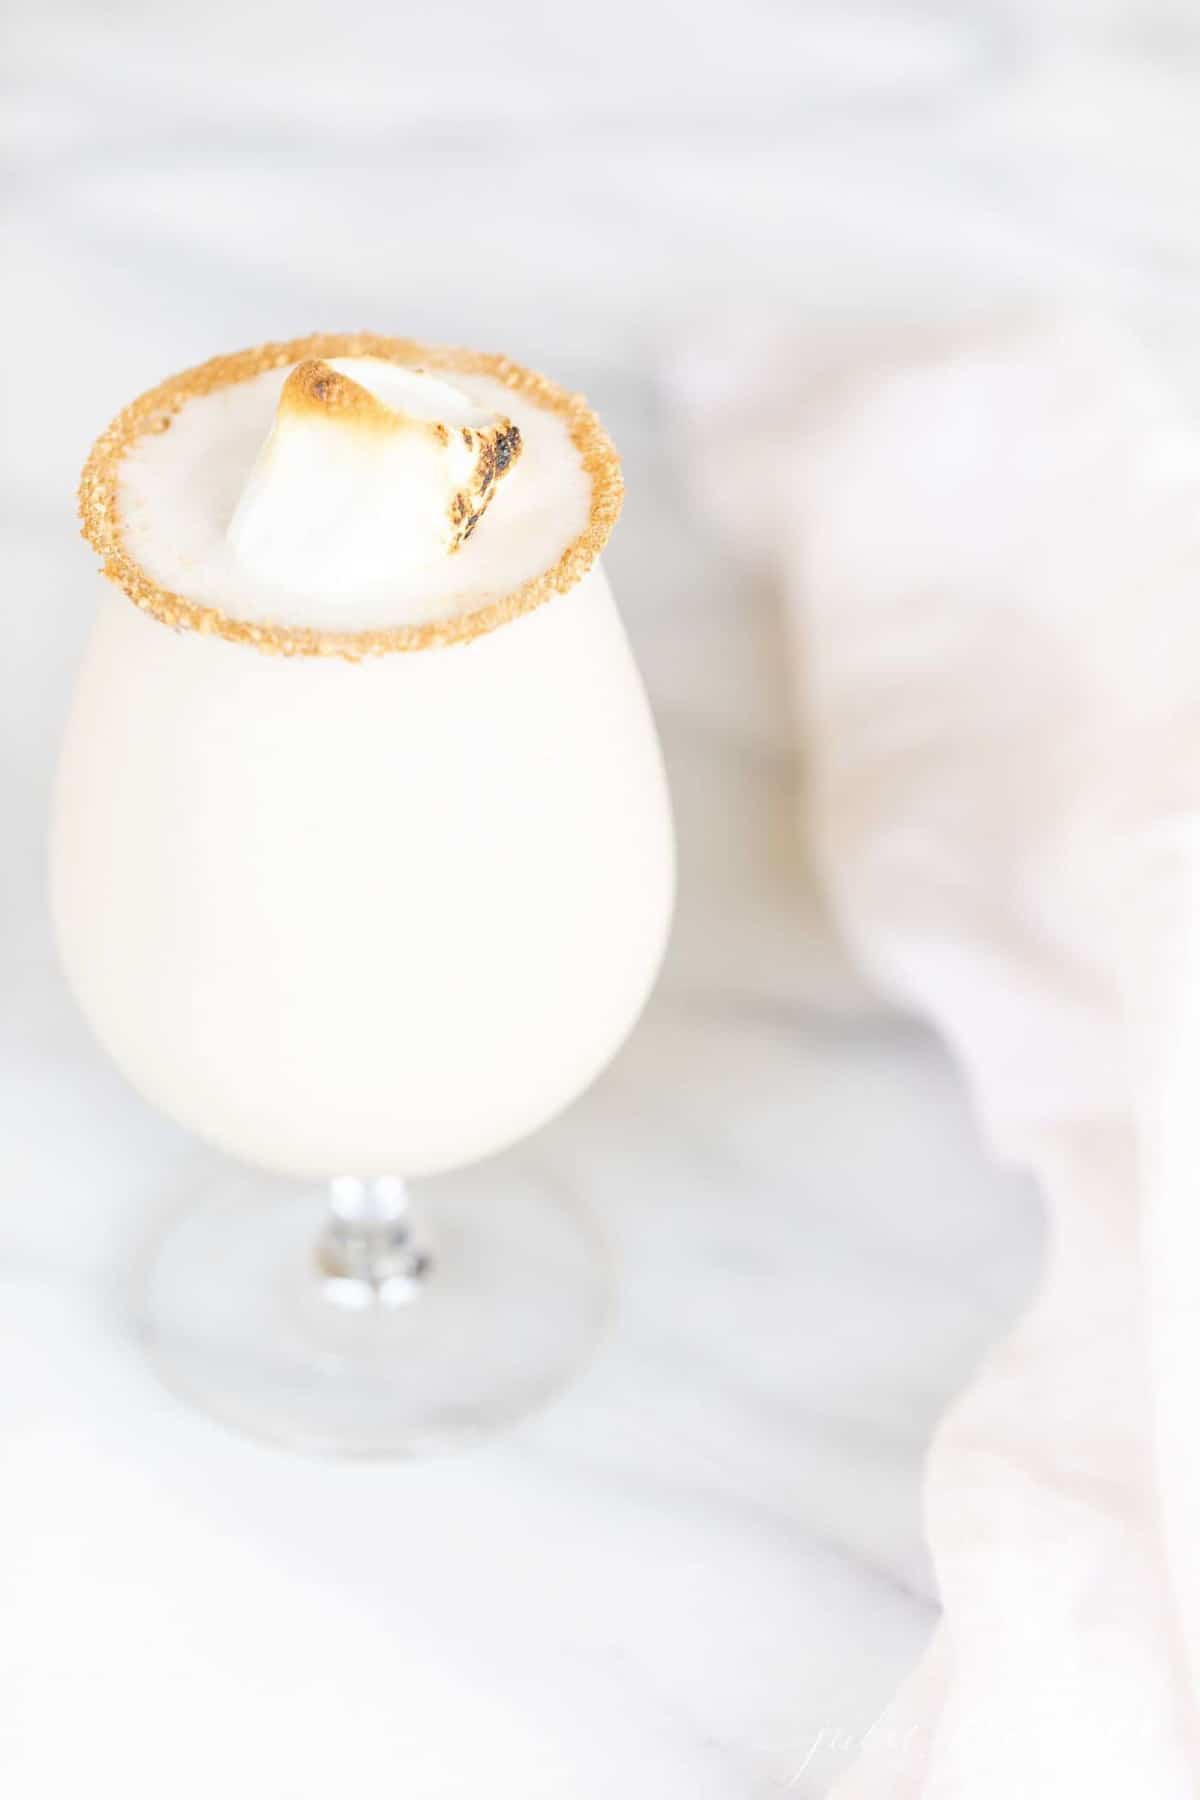 A marble counter top with a clear glass featuring an amaretto liqueur snowball recipe, toasted marshmallow for garnish.